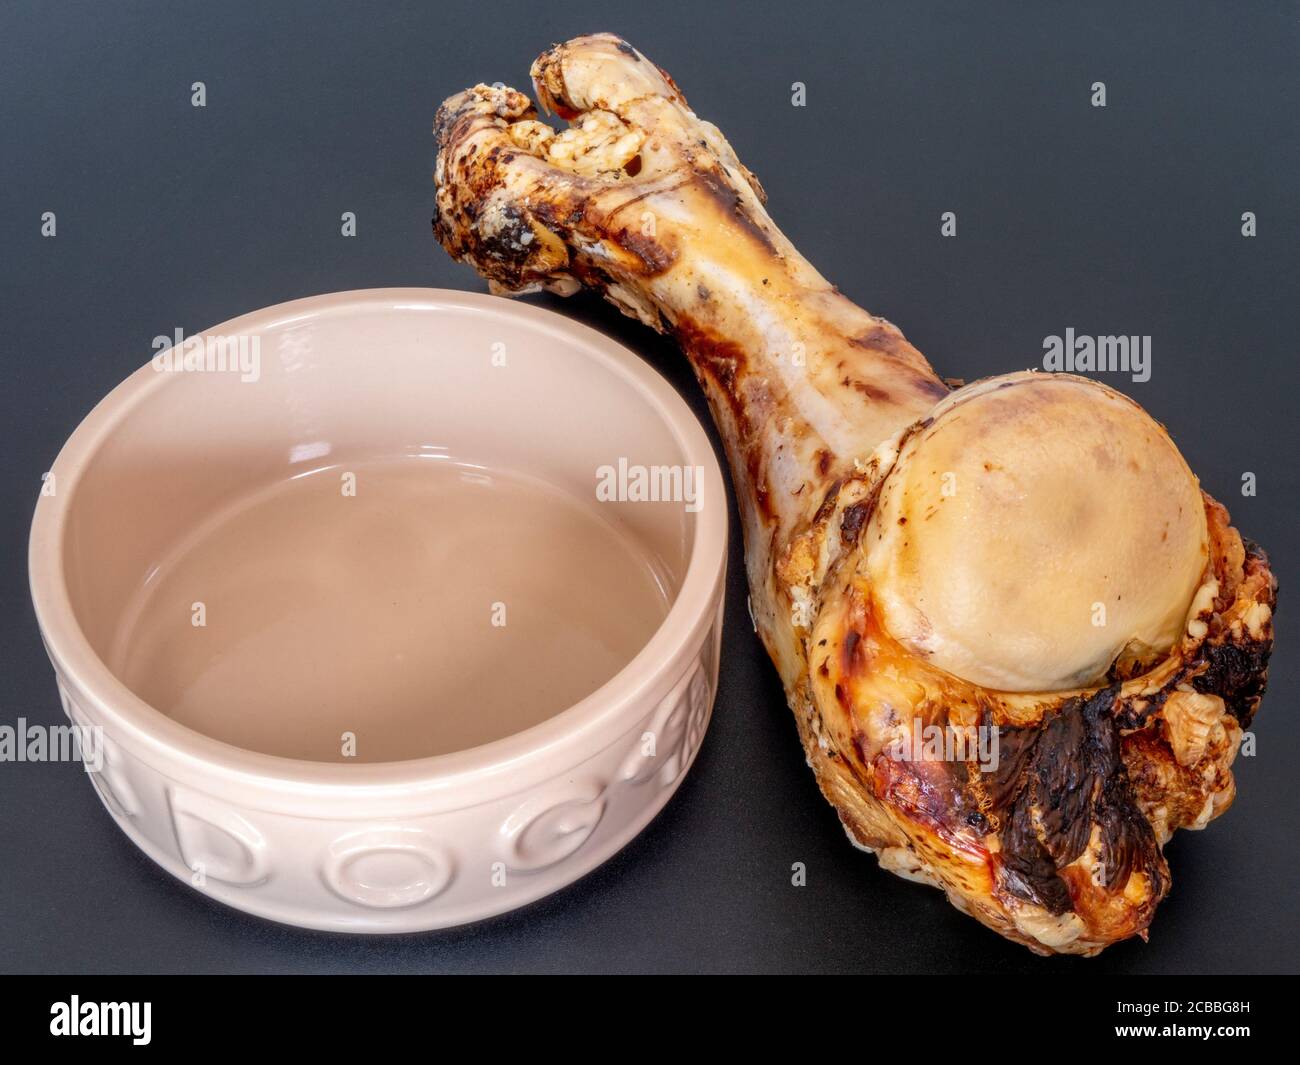 Closeup isolated shot of a giant roasted beef leg bone next to a small dog bowl – sold as a natural meaty treat for a pet dog to chew on. Stock Photo